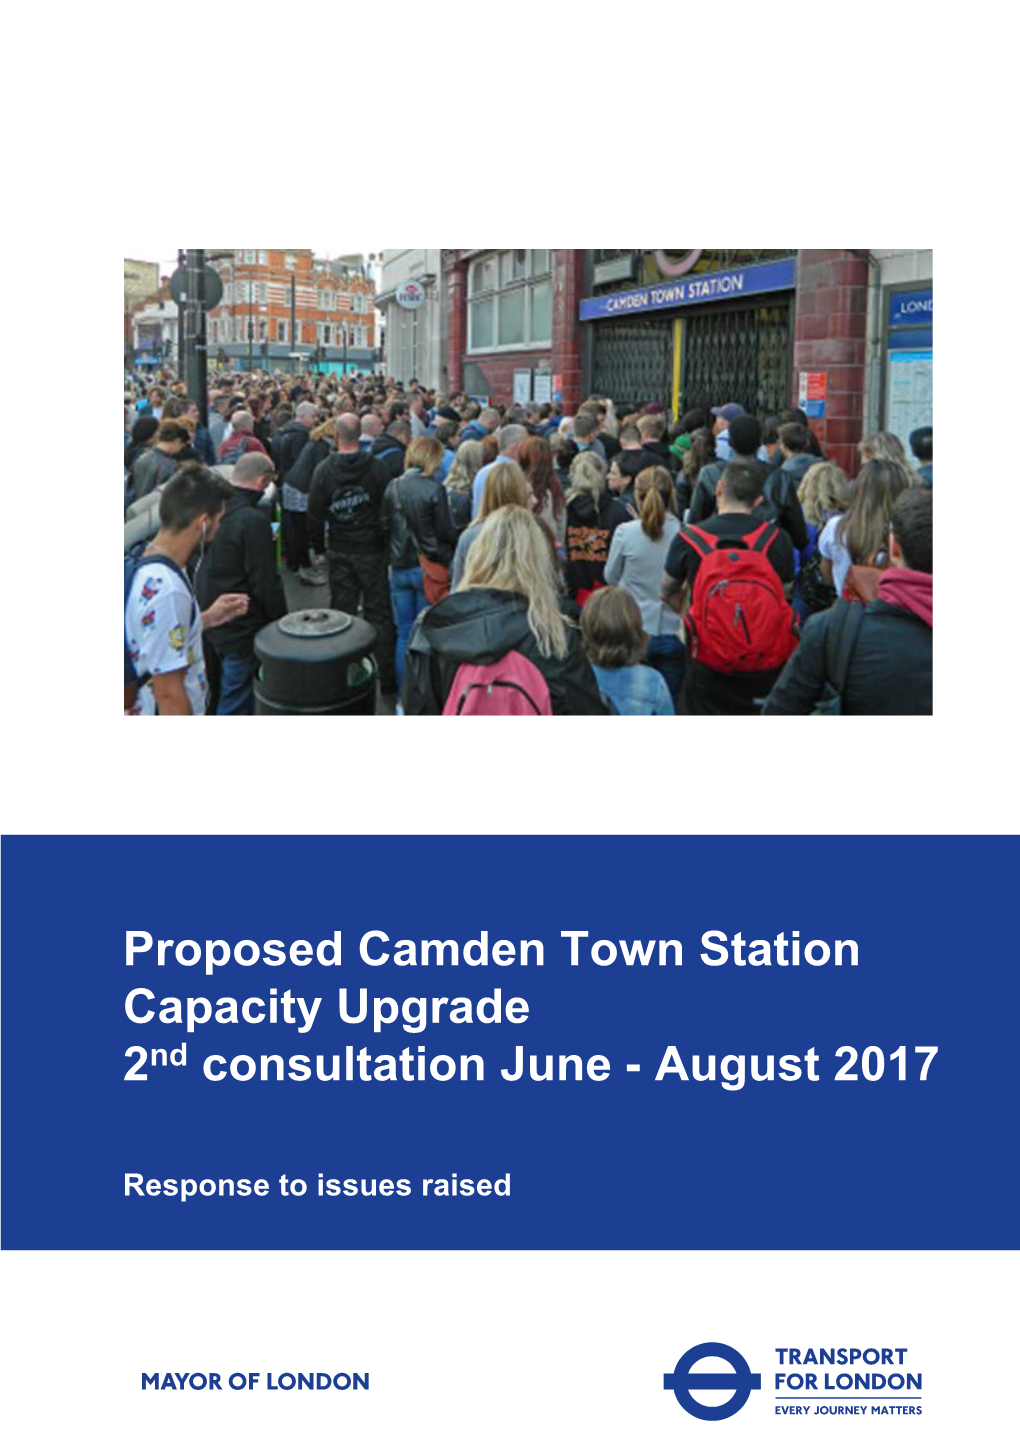 Camden Town Station Capacity Upgrade Response to Issues Raised